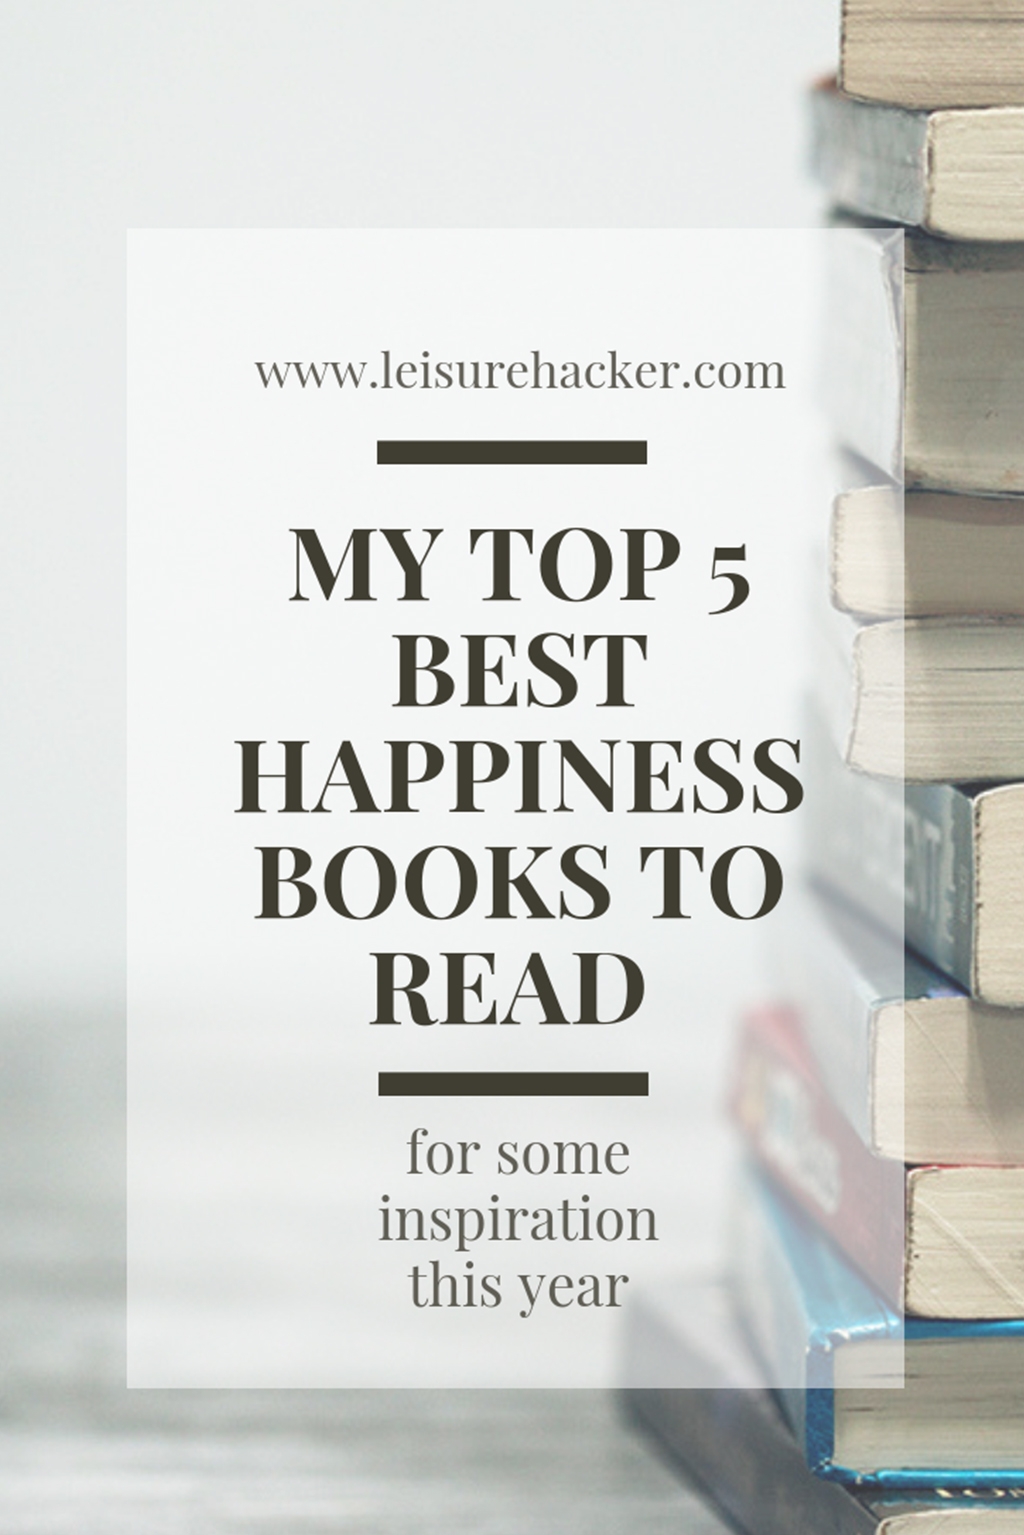 My top 5 best happiness books to read for some inspiration this year